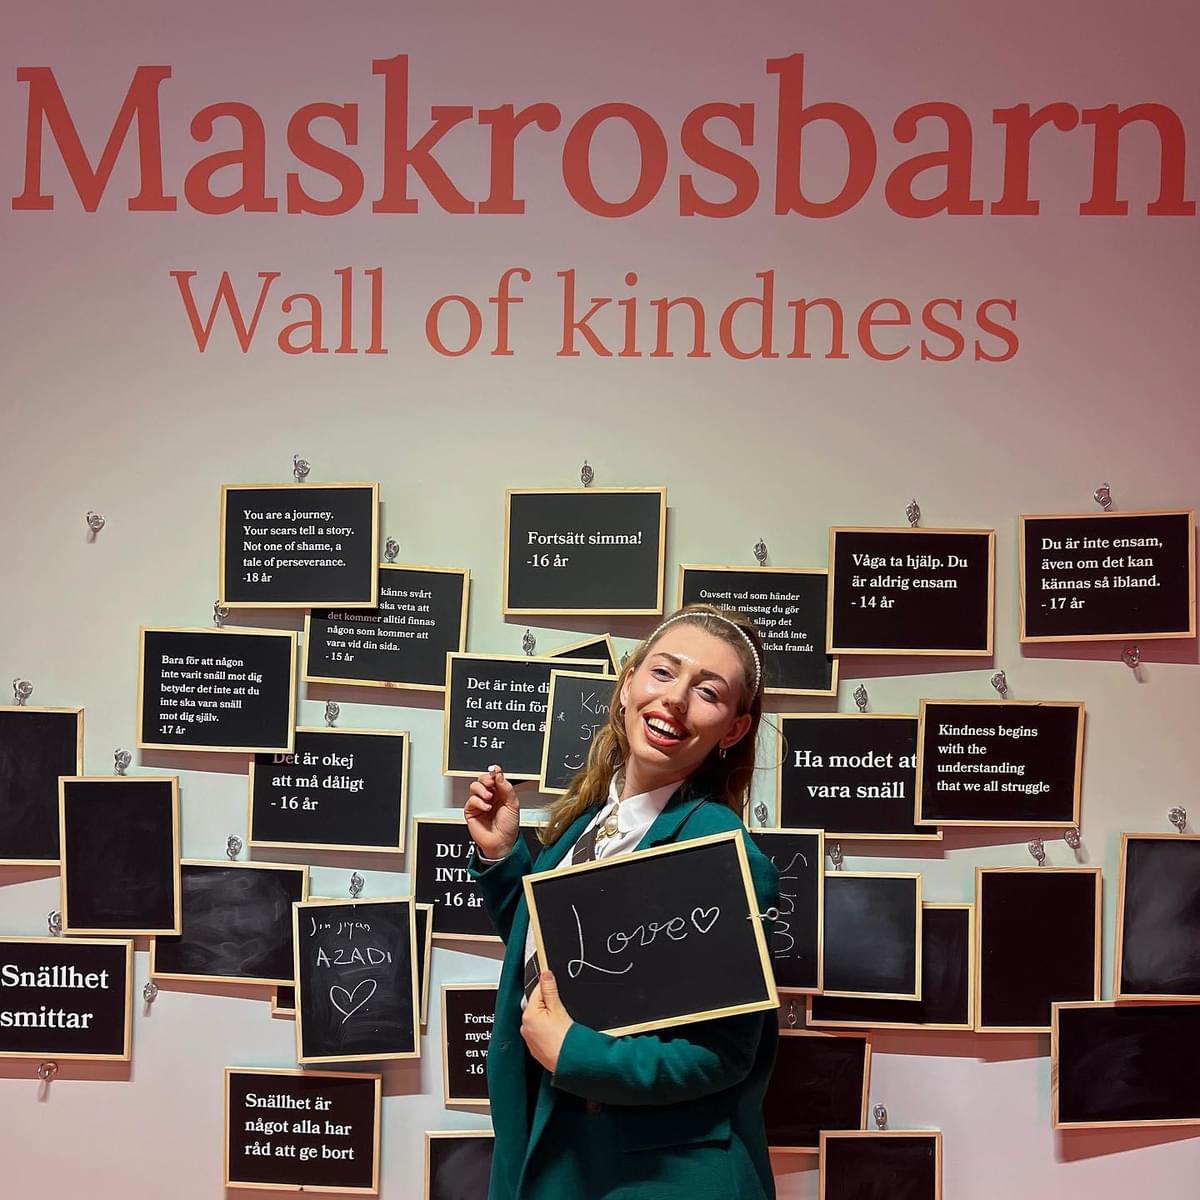 Write your thoughts at the Maskrosbarn Wall of Kindness